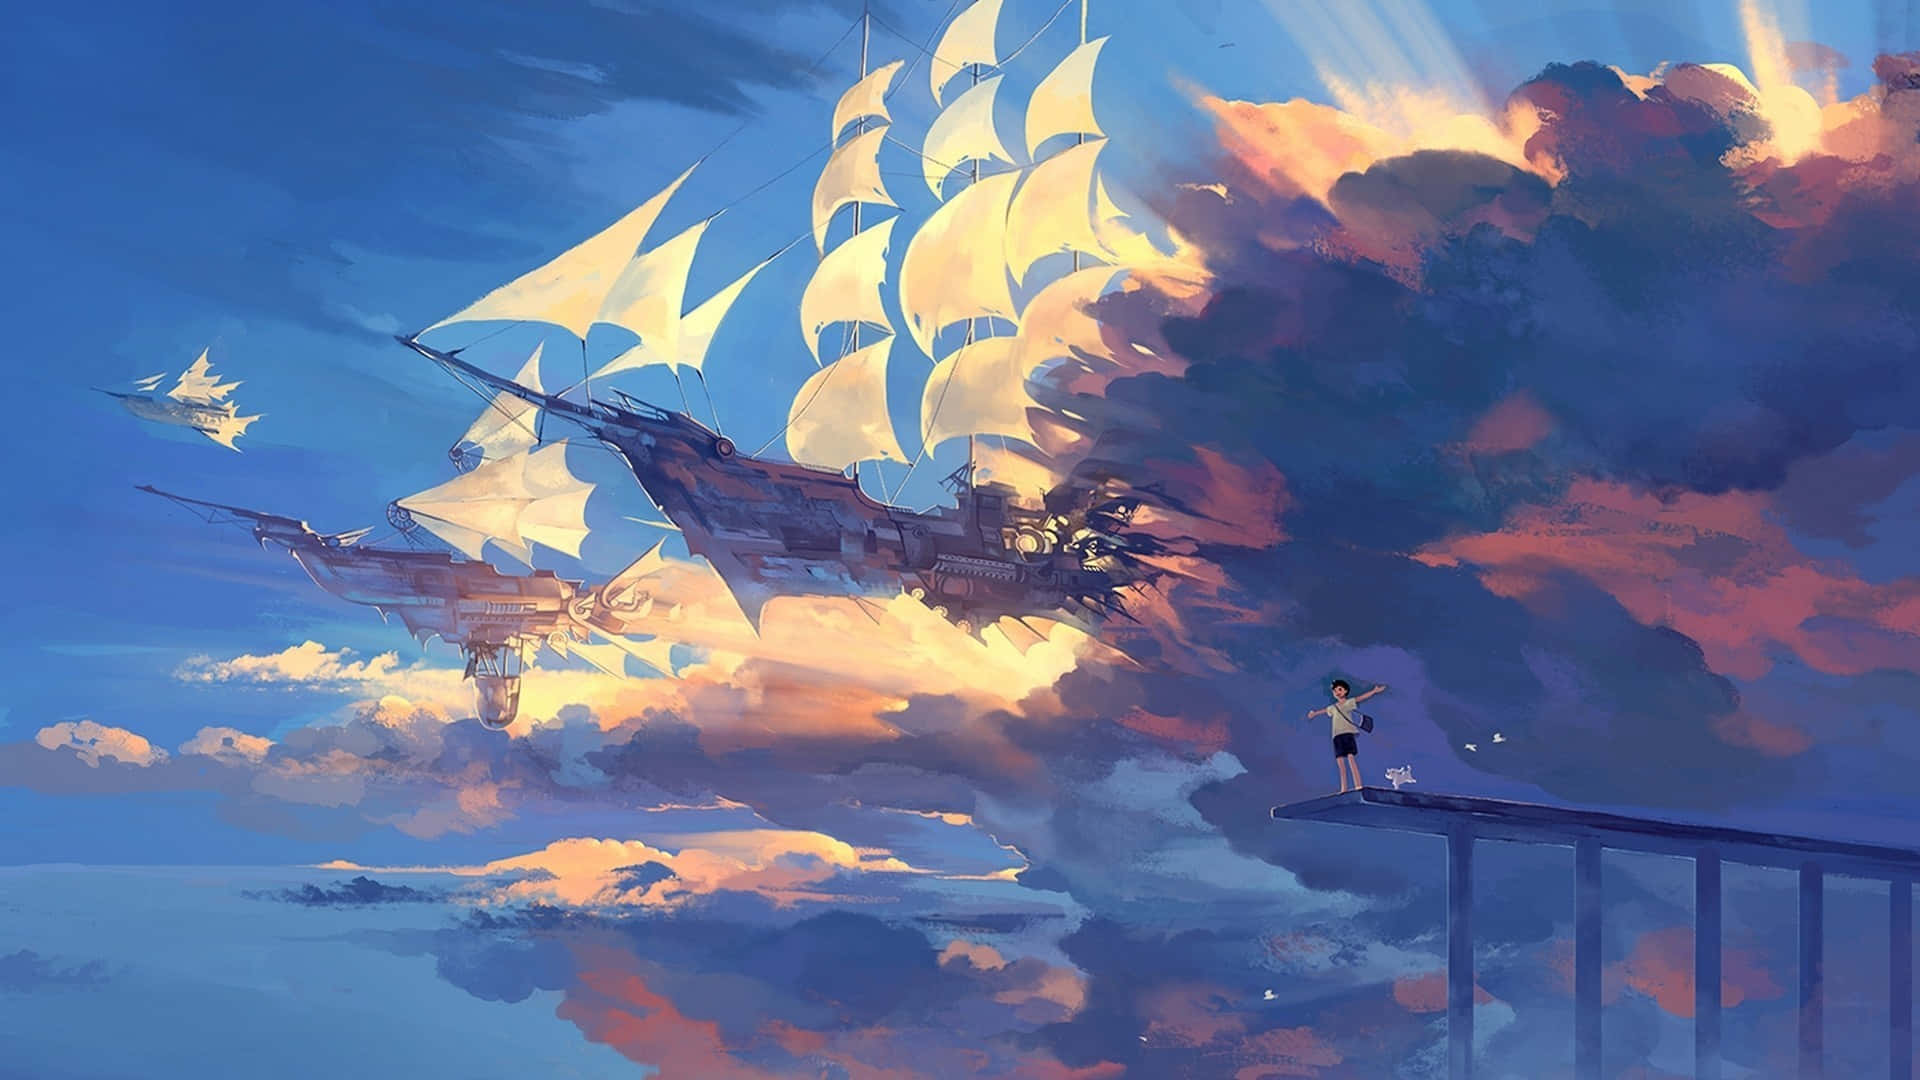 Ship In The Clouds Beautiful Anime Scenery Wallpaper